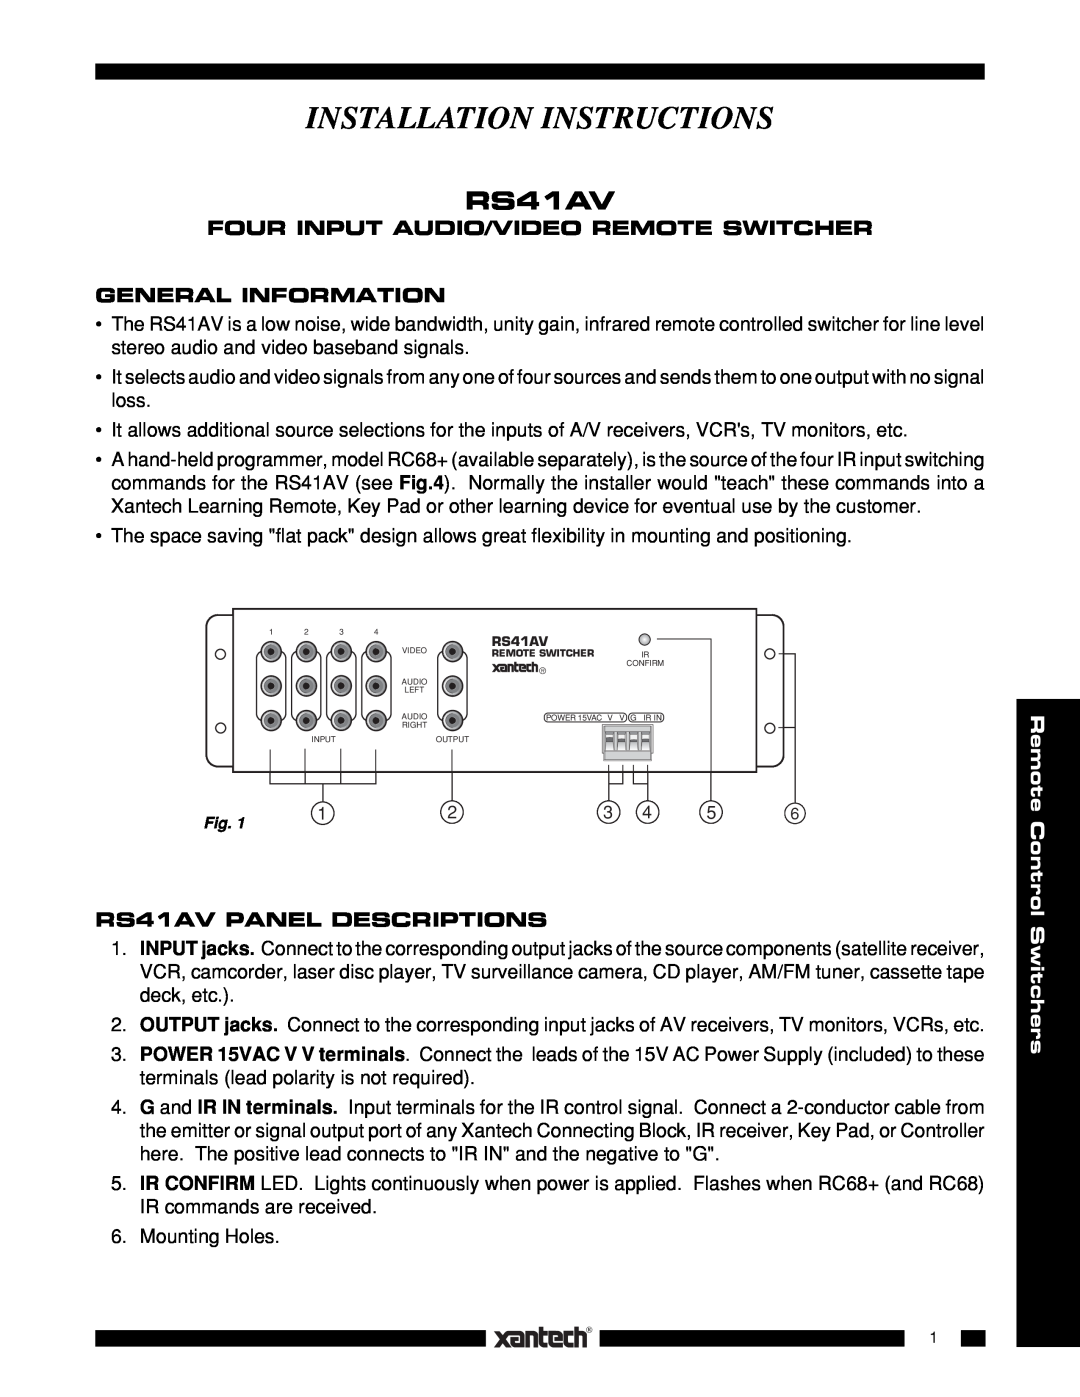 Xantech RS41AV installation instructions Four Input Audio/Video Remote Switcher General Information 